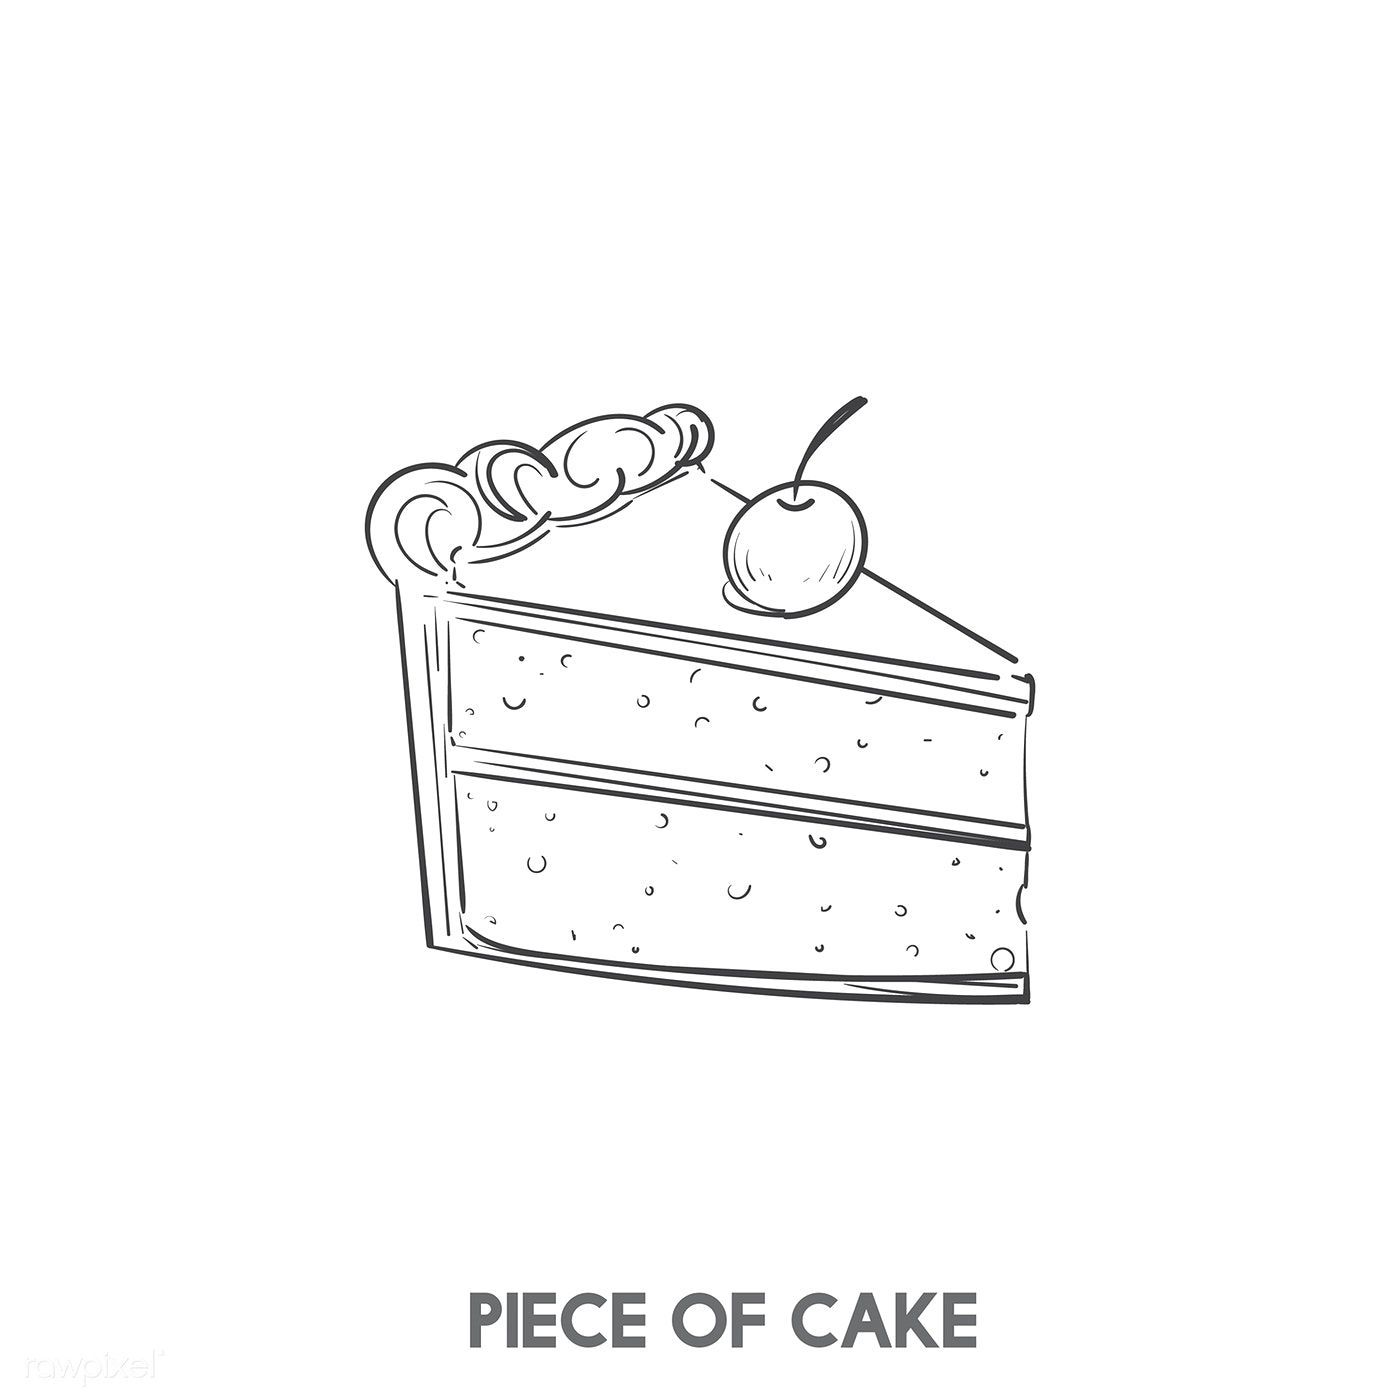 Download premium vector of a piece of cake 402757 -   10 cake Illustration marker
 ideas